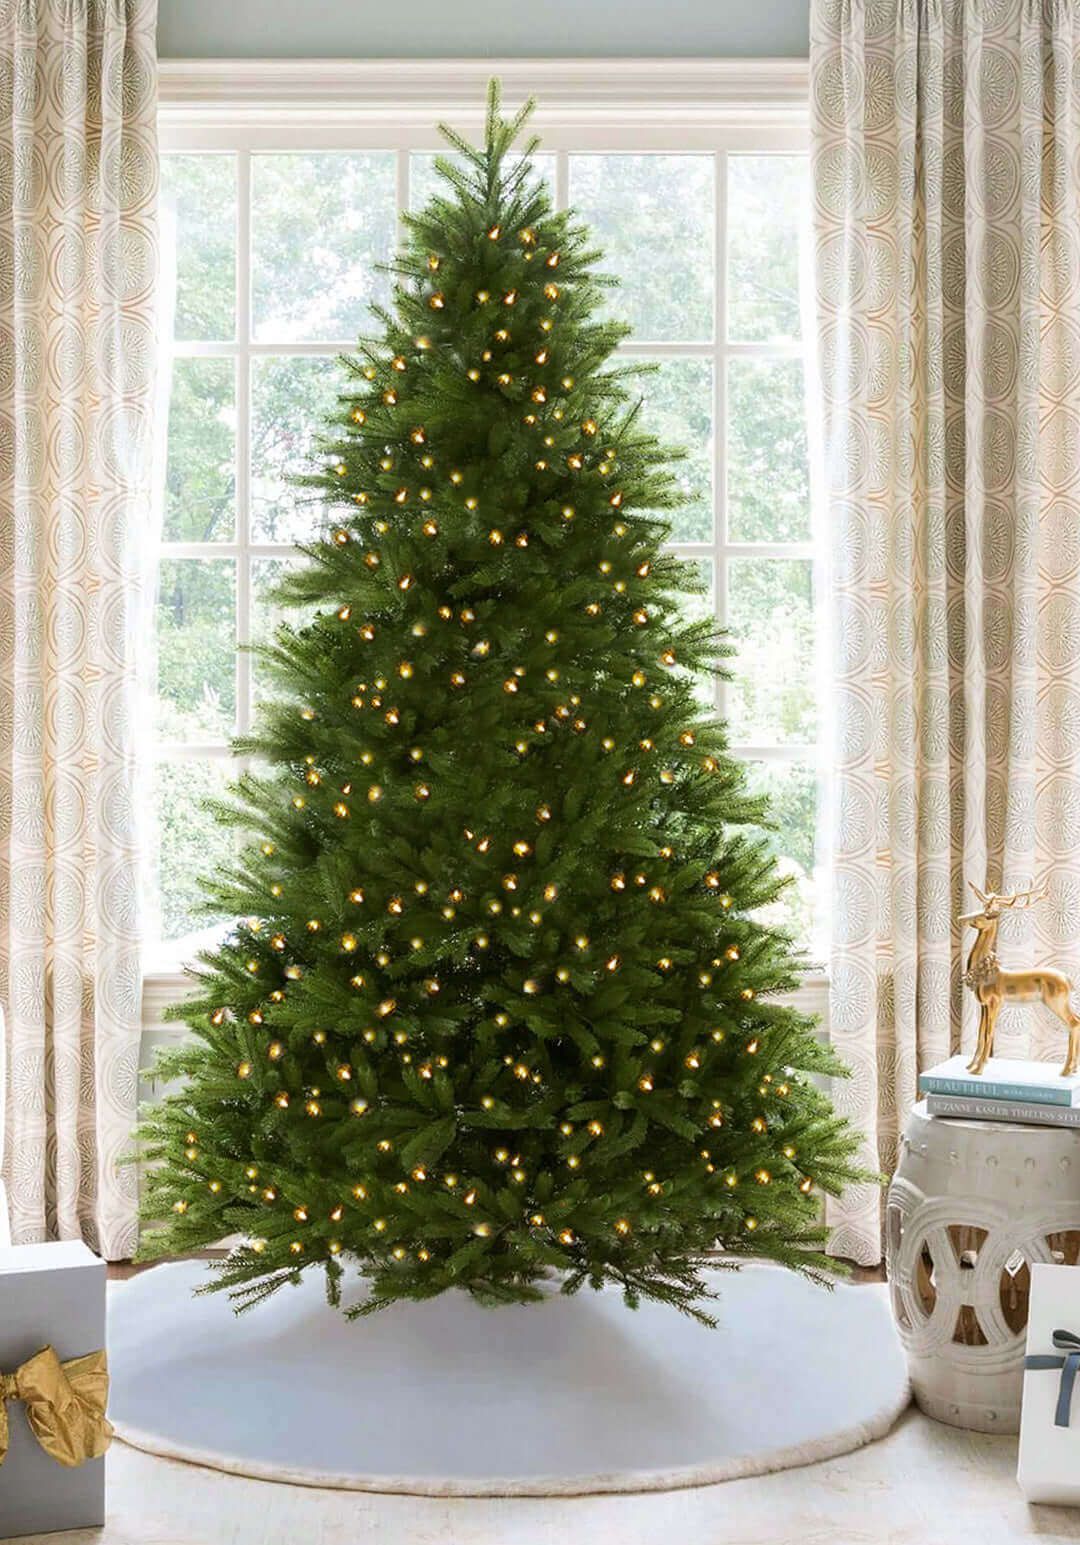 10' King Fraser Fir Artificial Christmas Tree with 1600 Warm White & Multi-Color LED Lights | King of Christmas